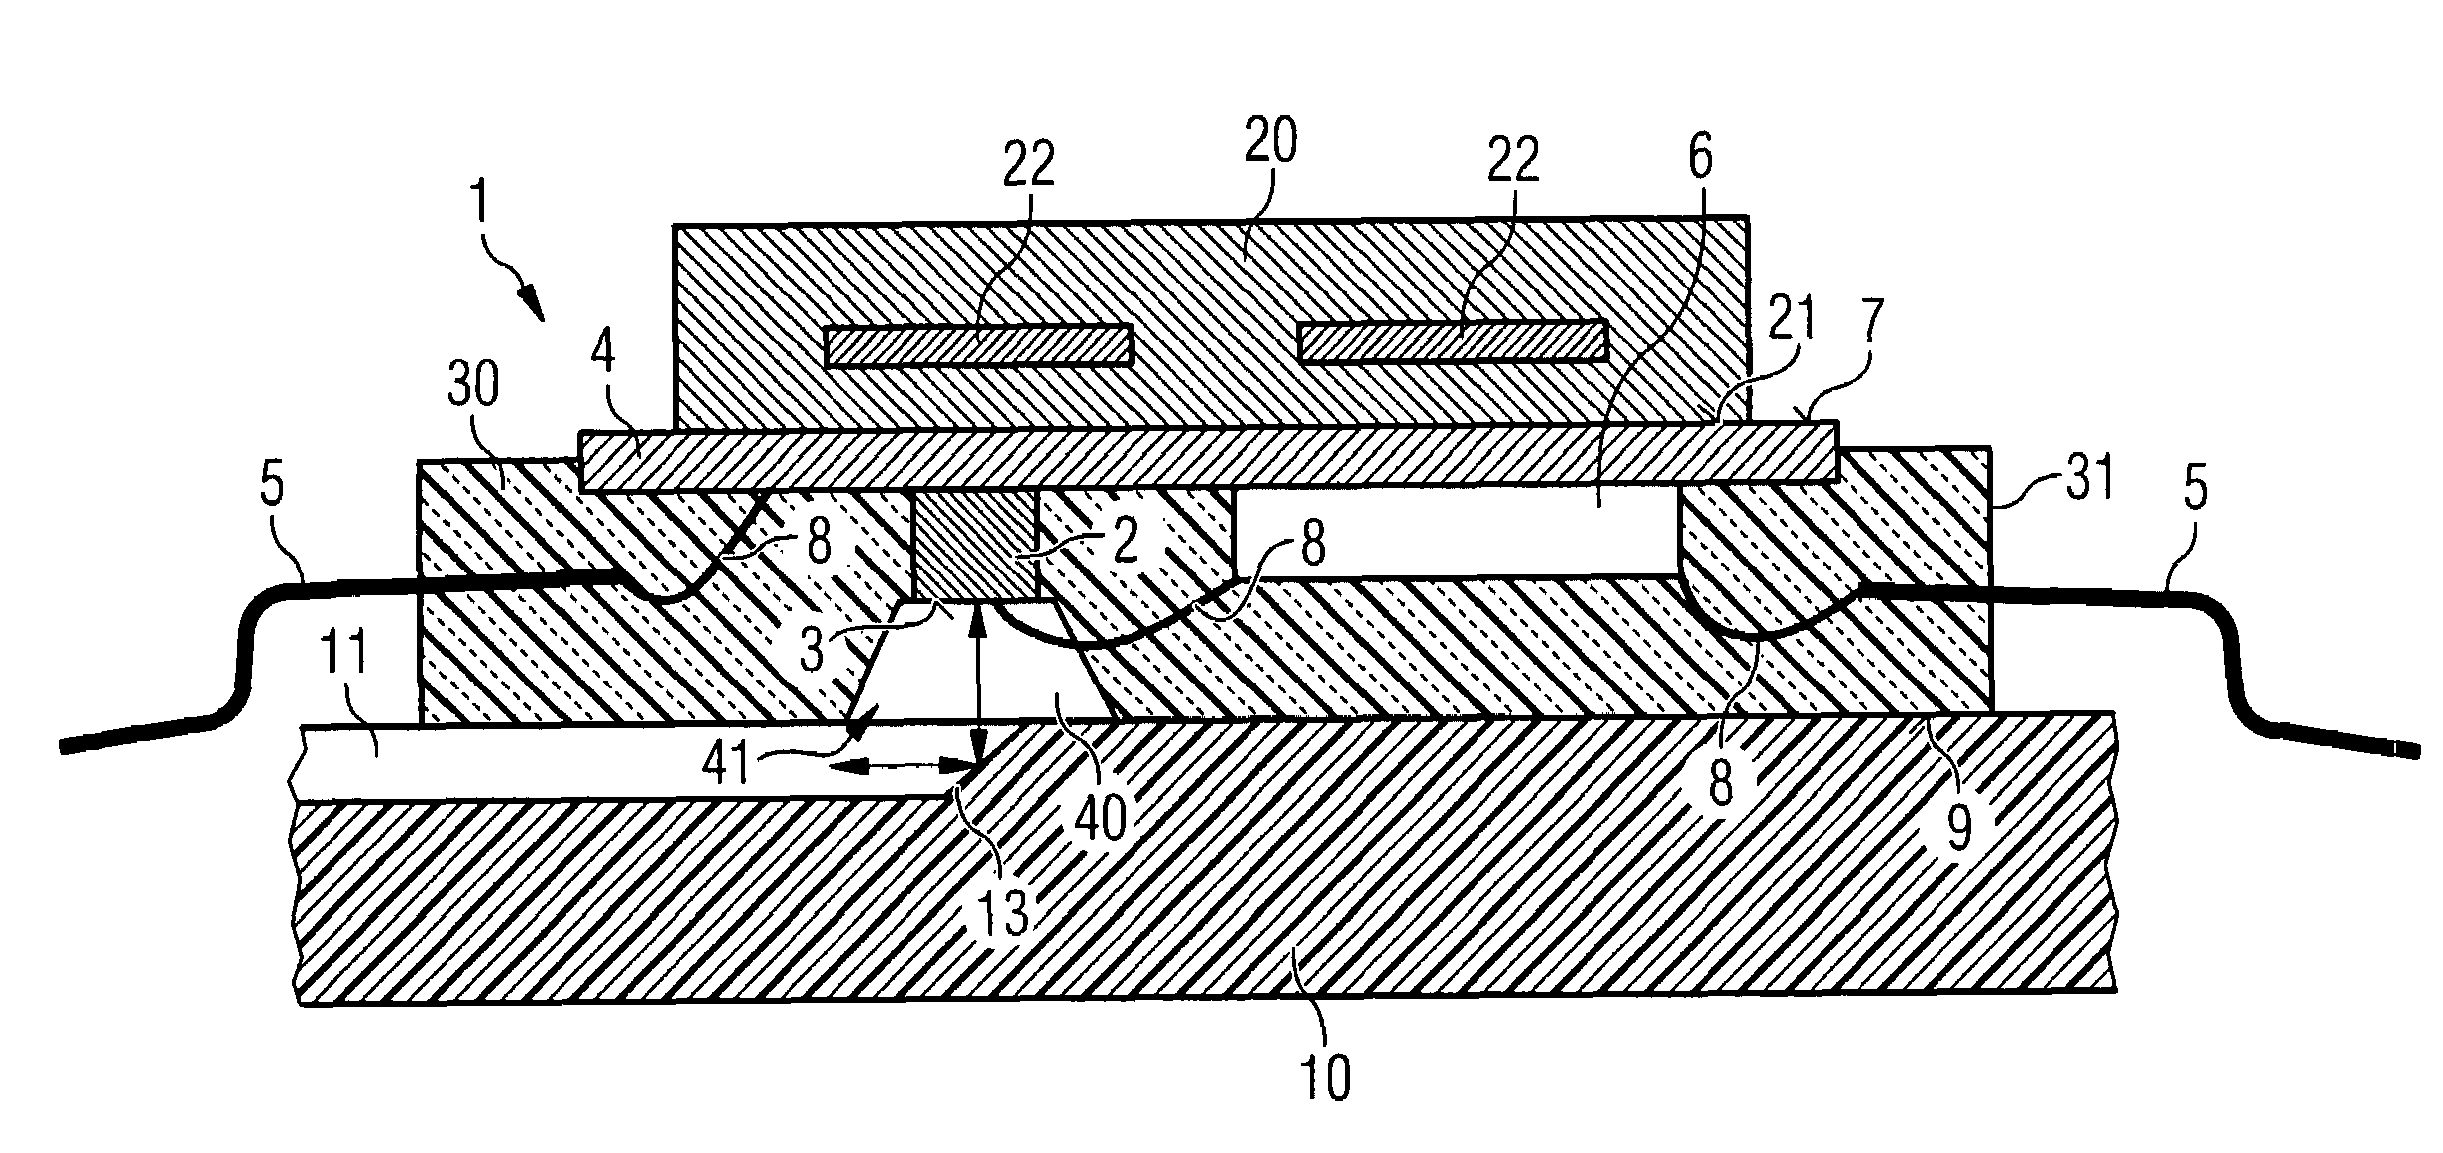 Optoelectronic arrangement having a surface-mountable semiconductor module and a cooling element